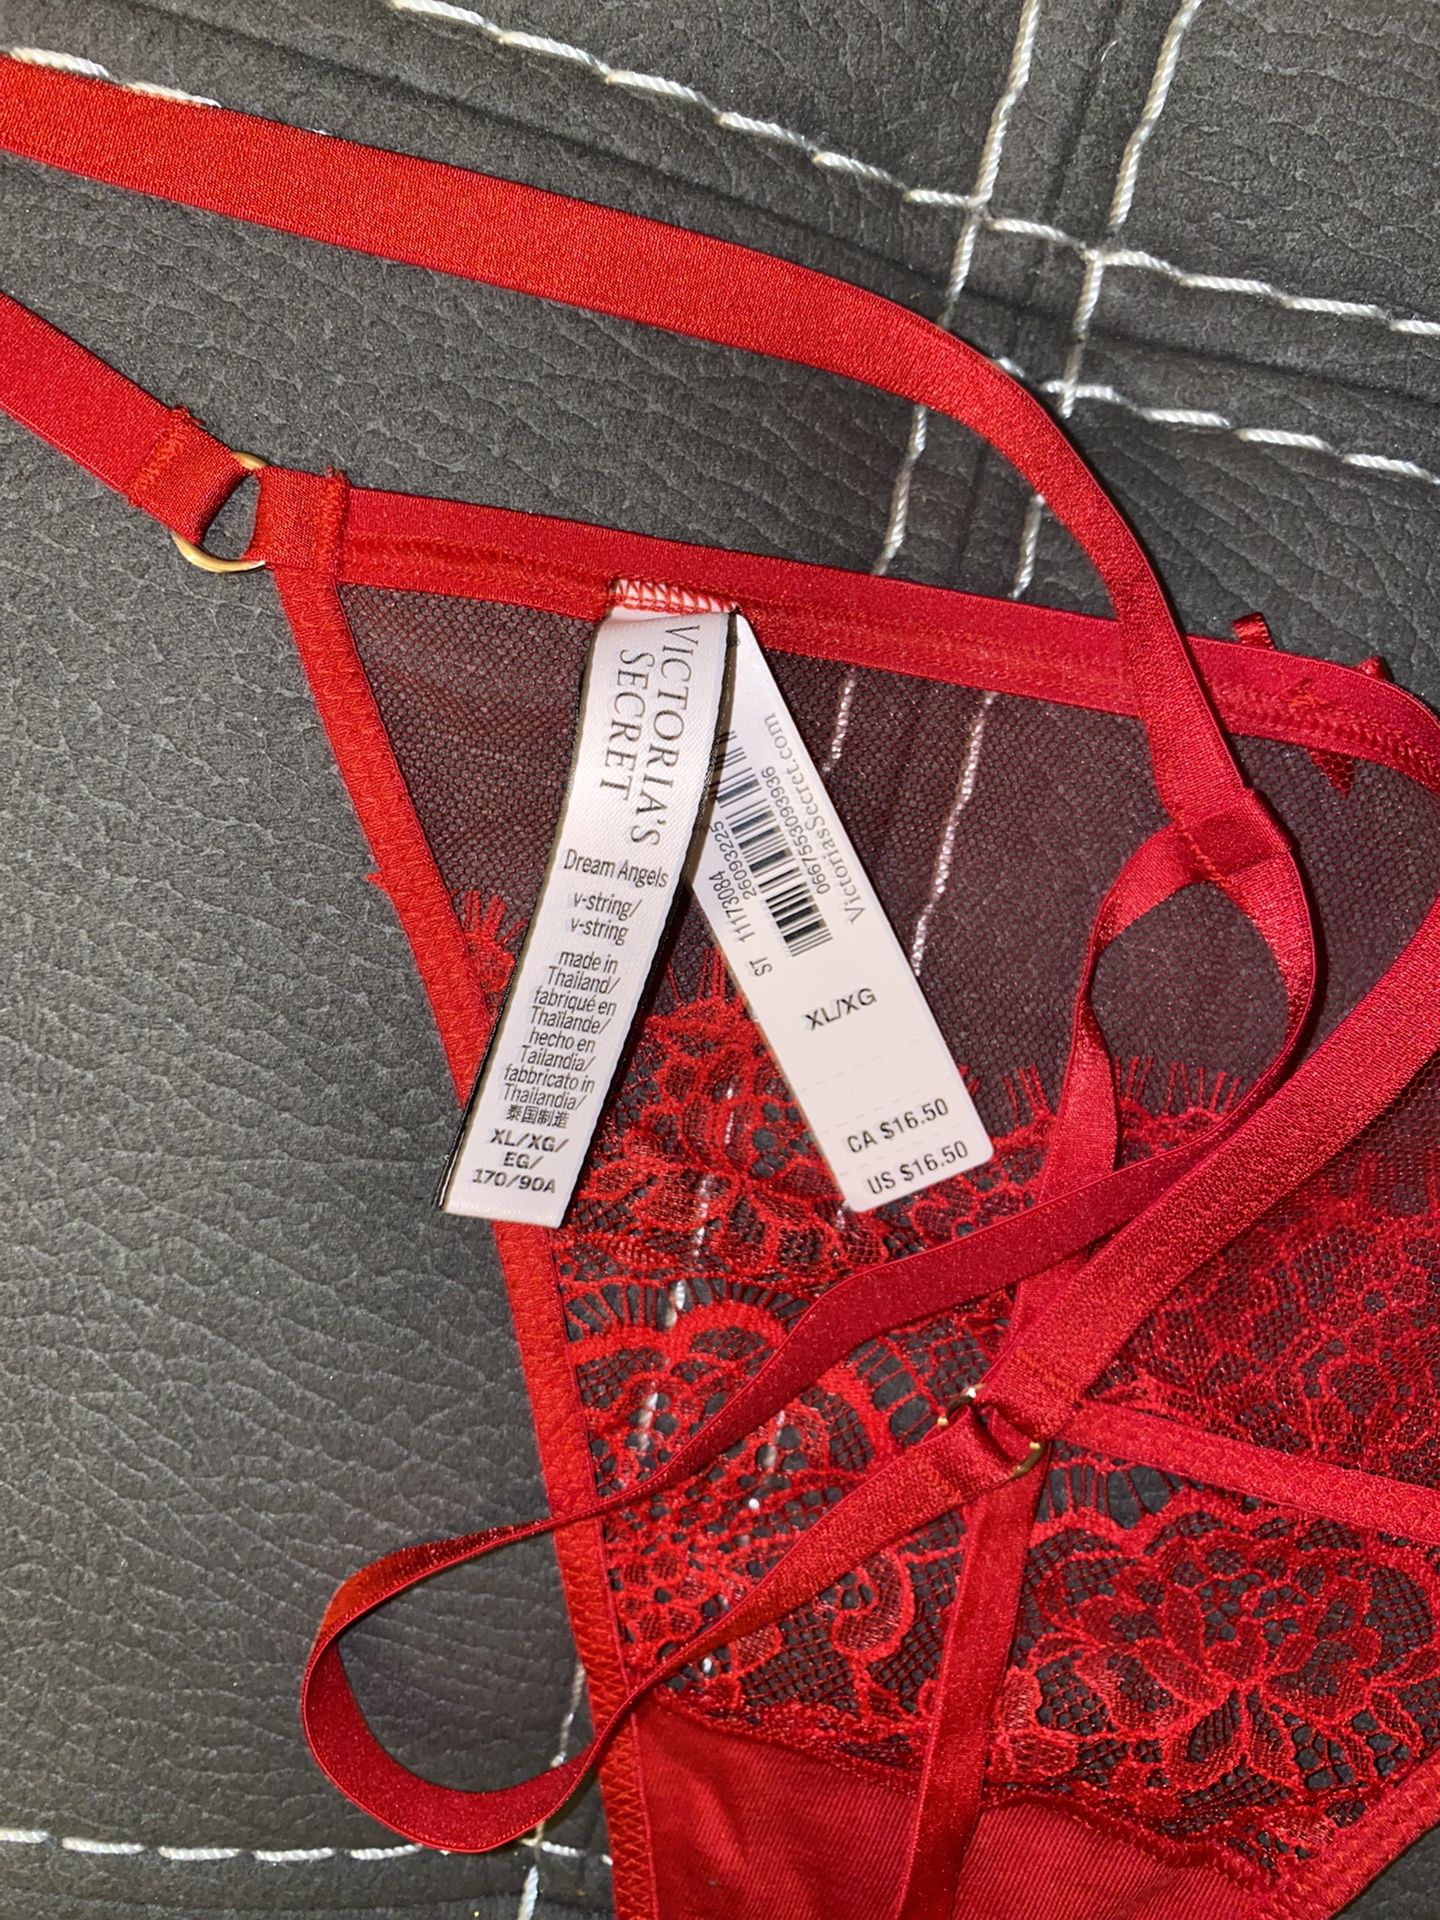 New panties cheeky Victoria Secret Large red satin stretchy lace trim  luxurious strappy for Sale in Chandler, AZ - OfferUp